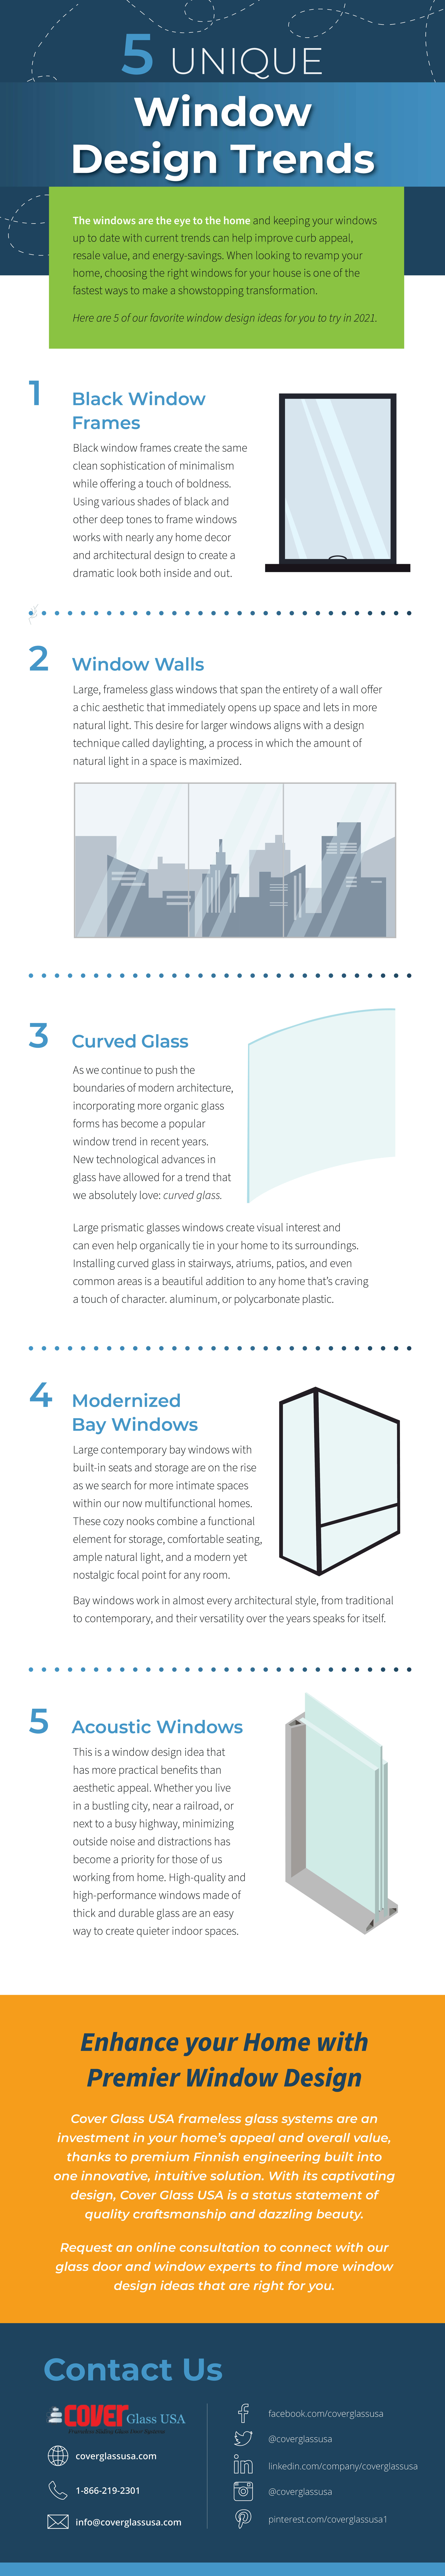 Cover Glass infographic - Window Design Trends